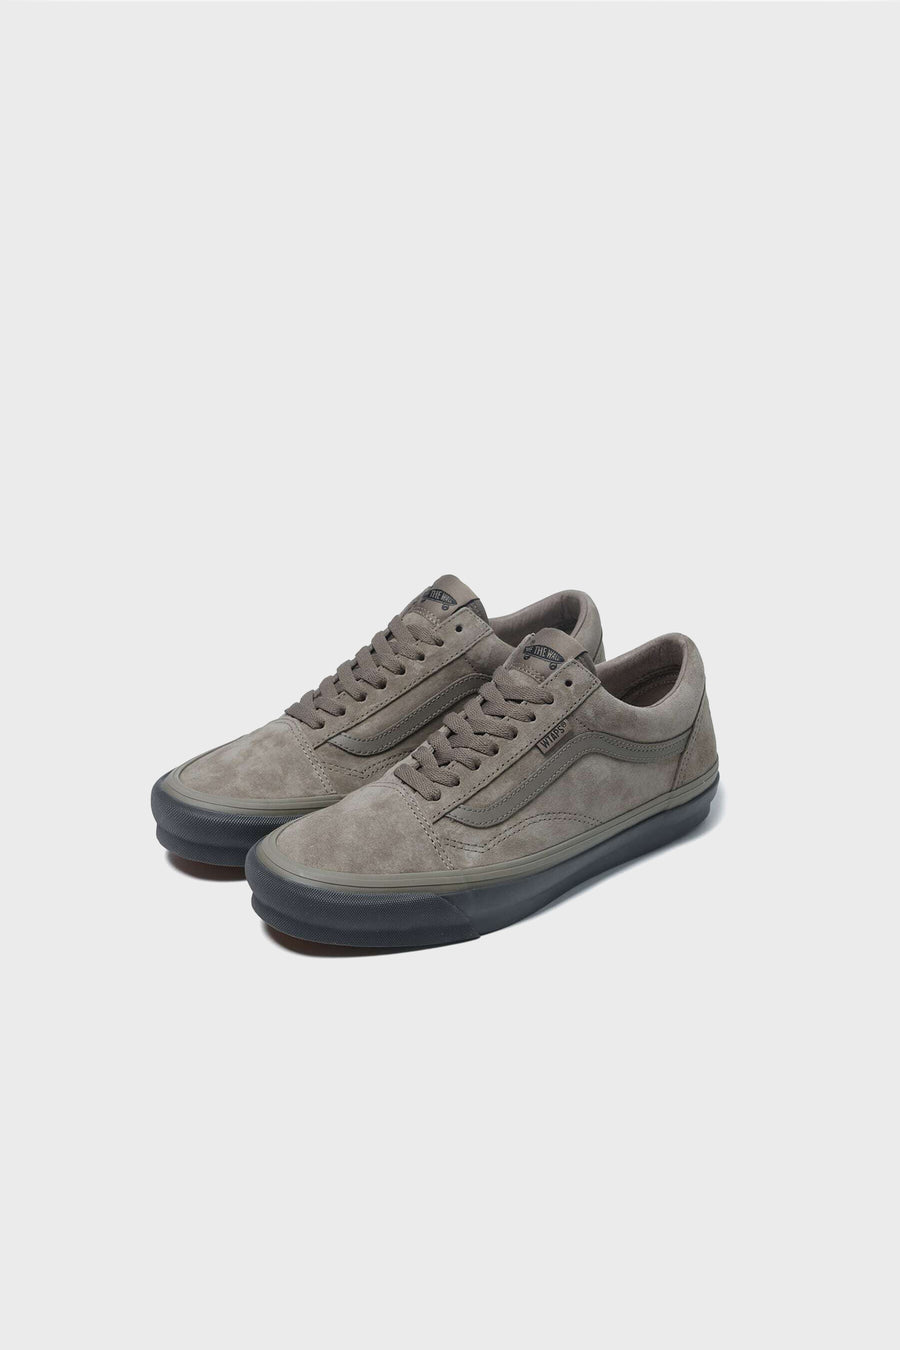 WTAPS OG Old Skool LX Coyote Brown 4P3XBMD (LAUNCH PRODUCT)